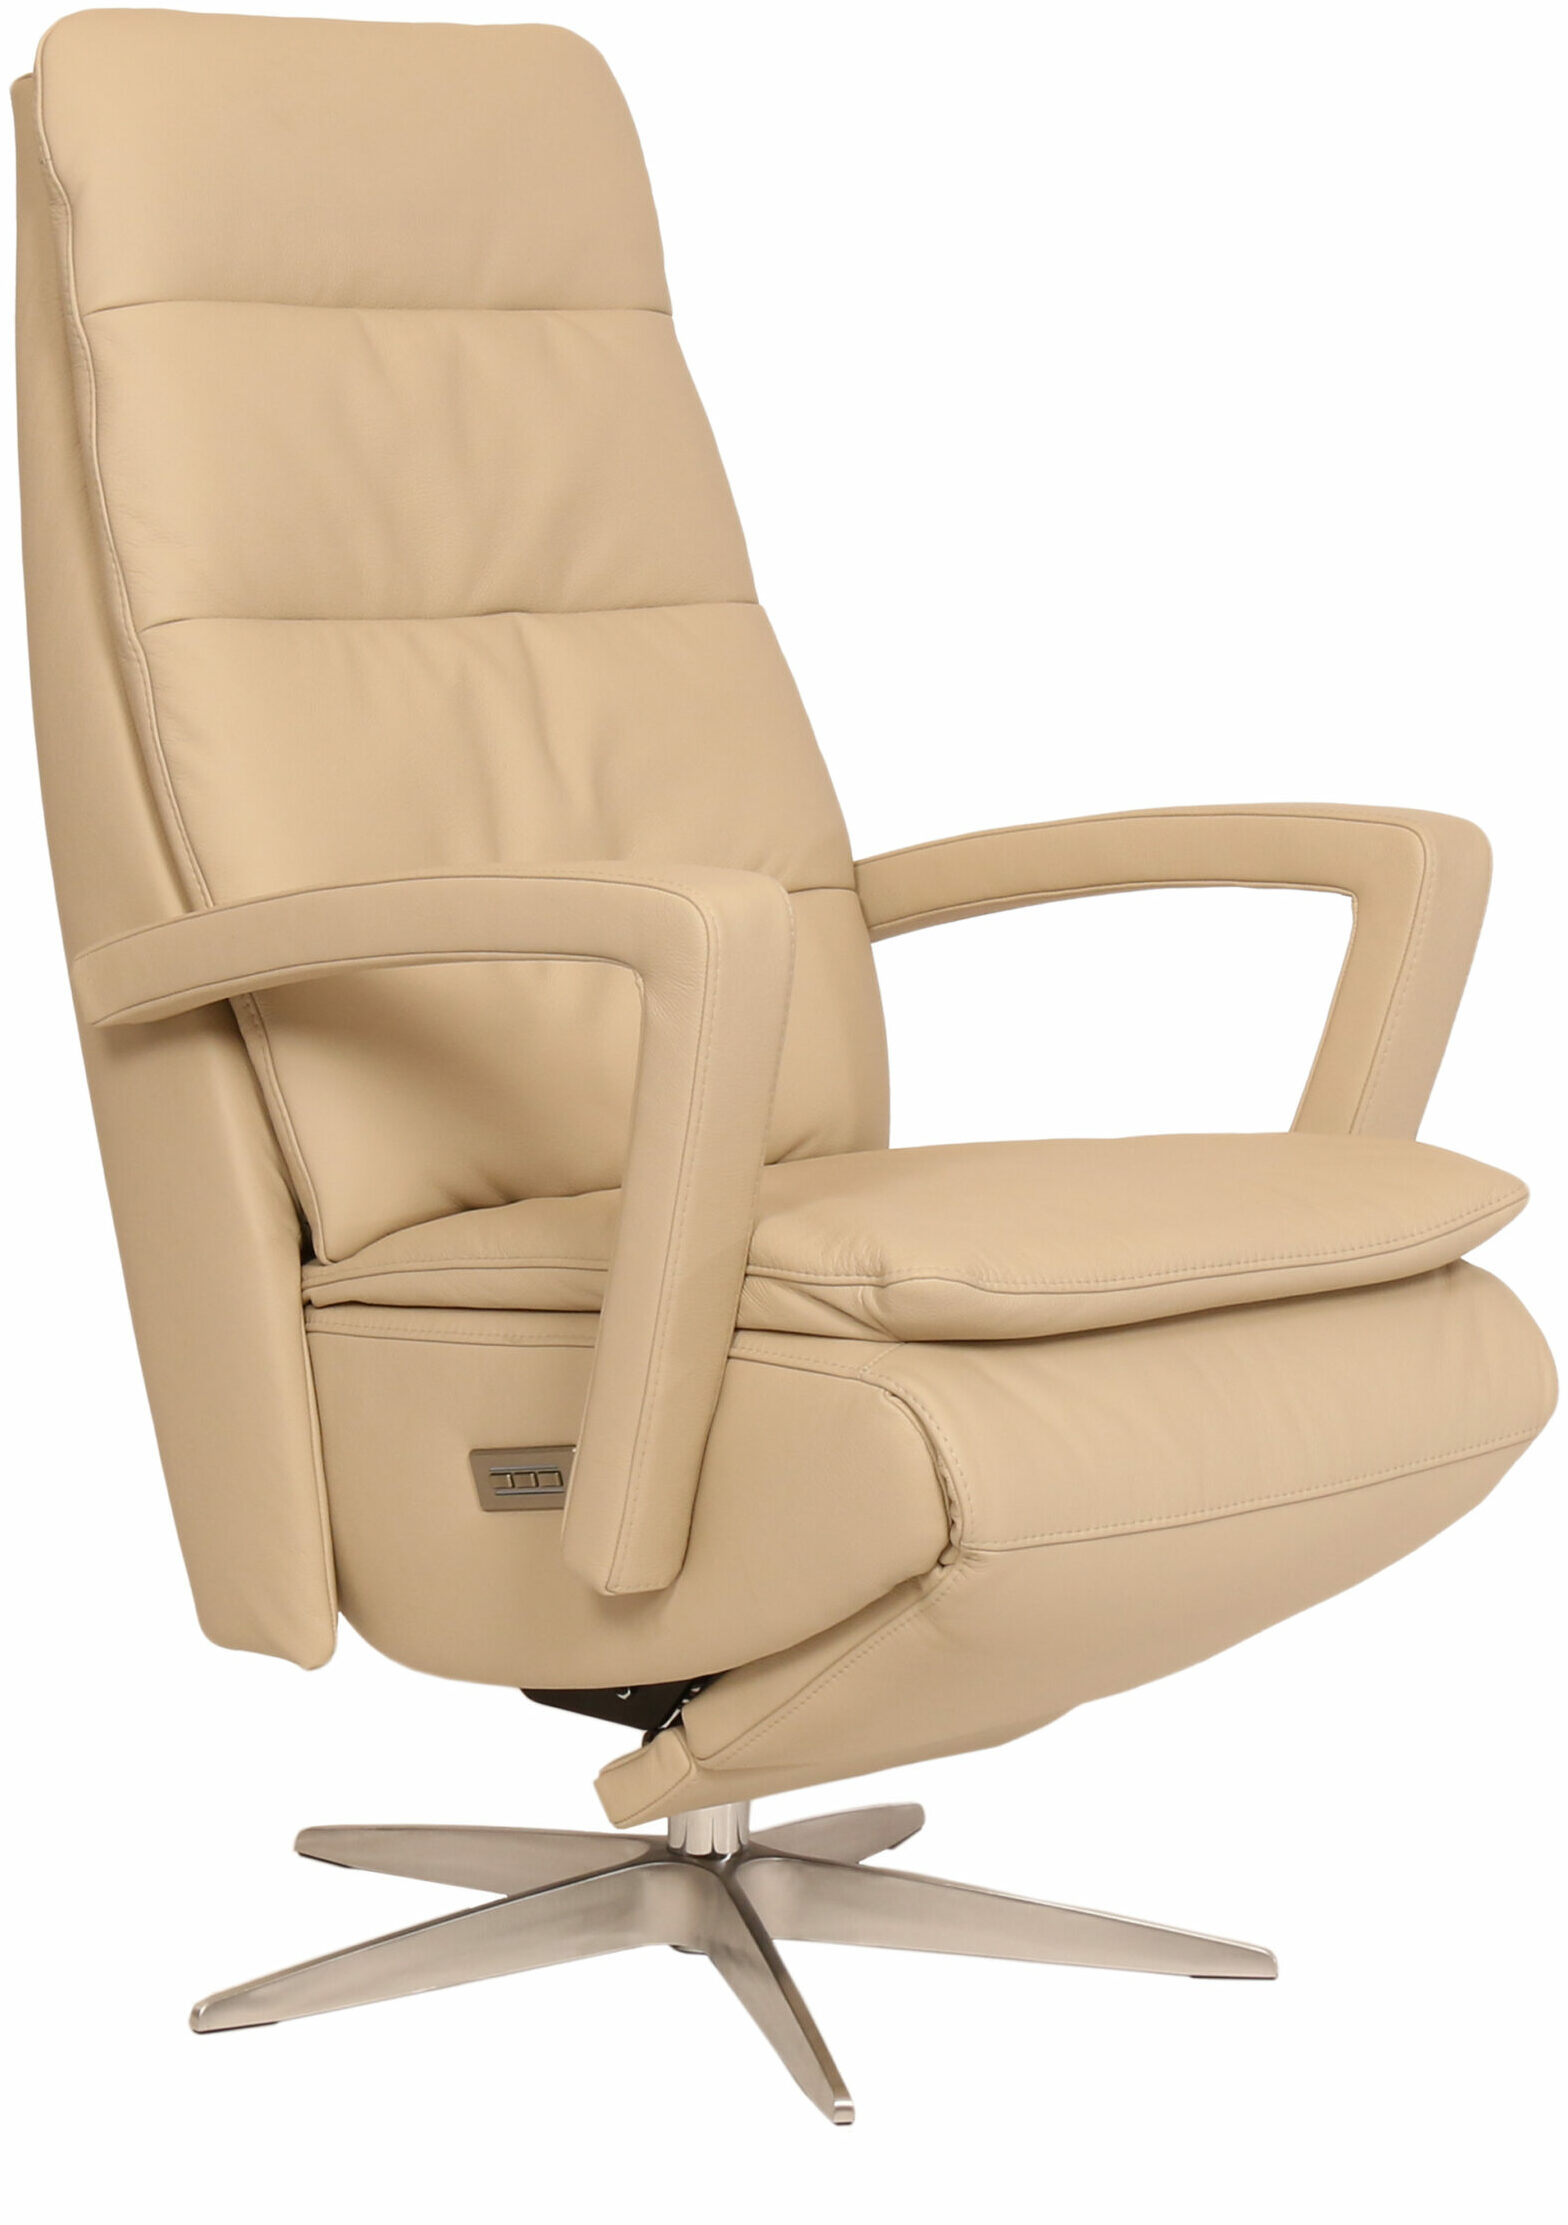 Twinz 235 relaxfauteuil